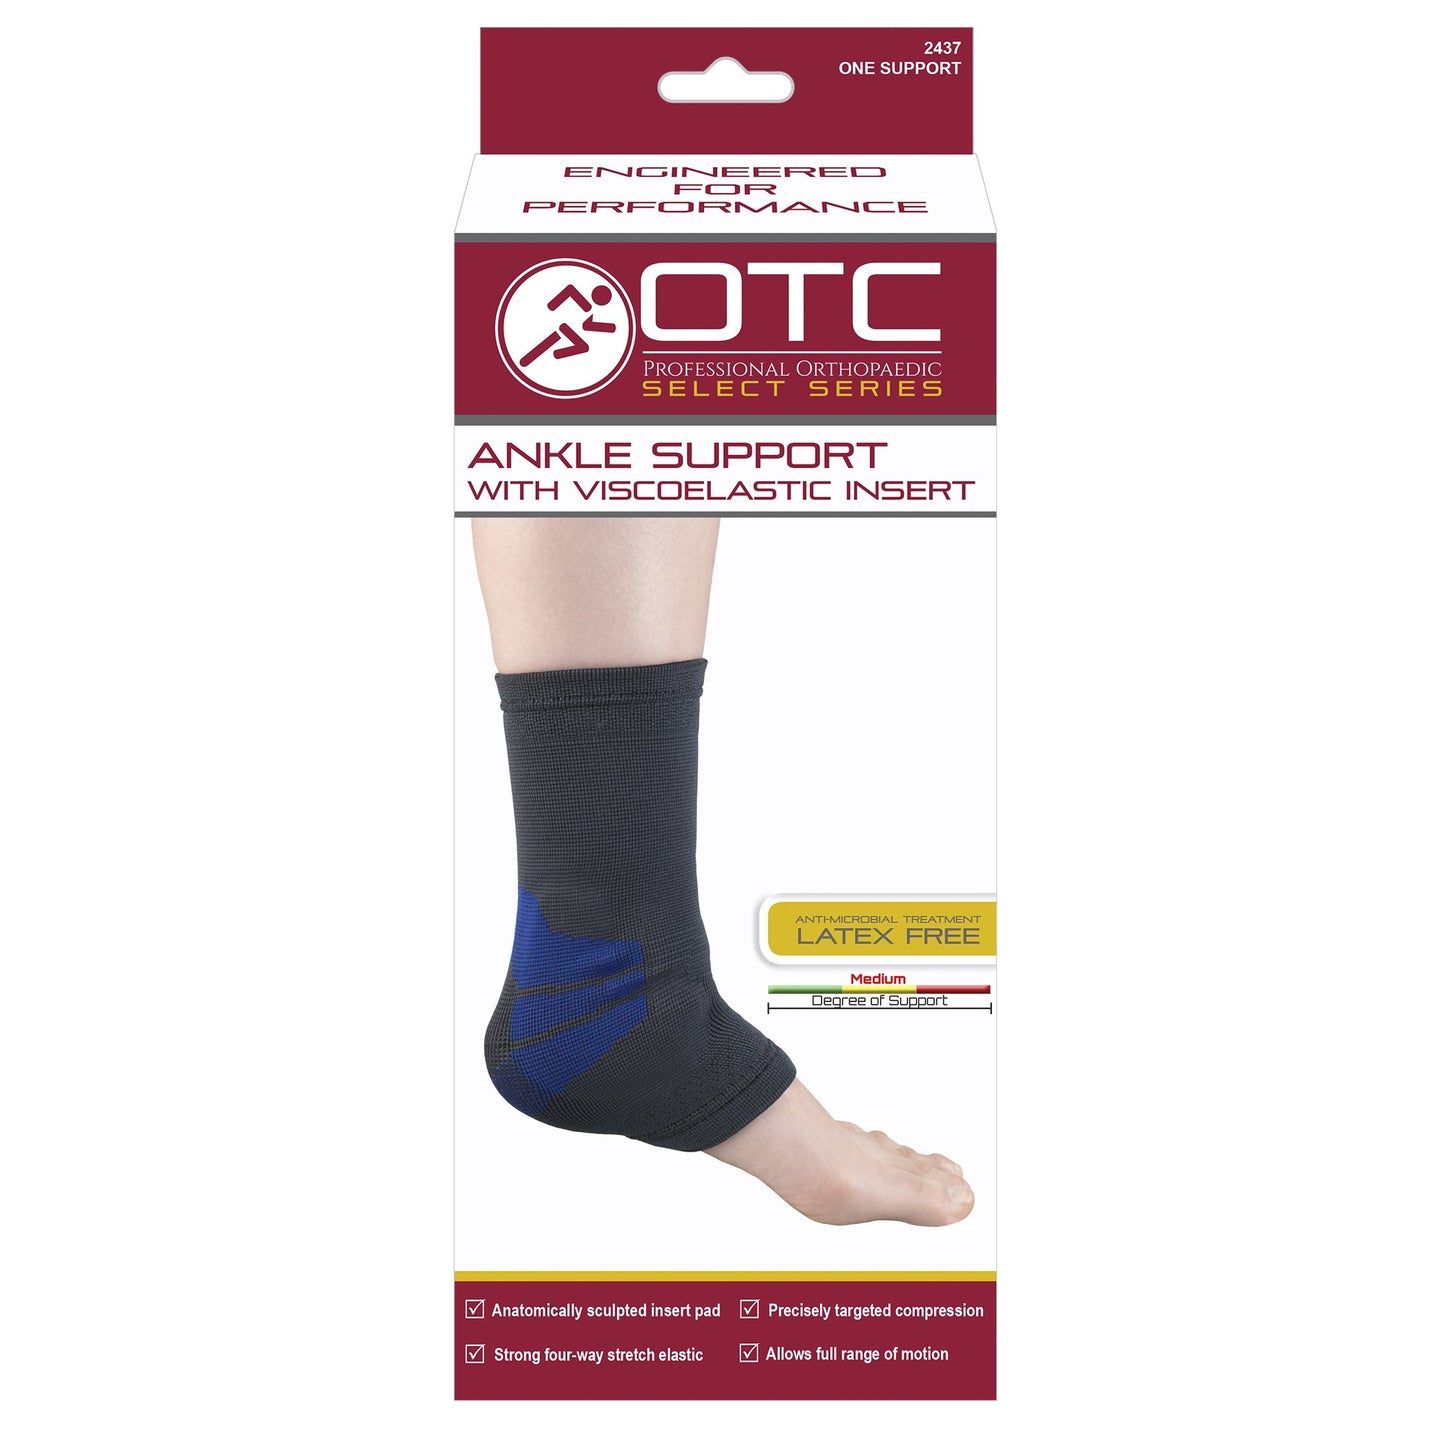 Advanced Ankle Support and Compression Gel Insert for Unparalleled Comfort and Stability